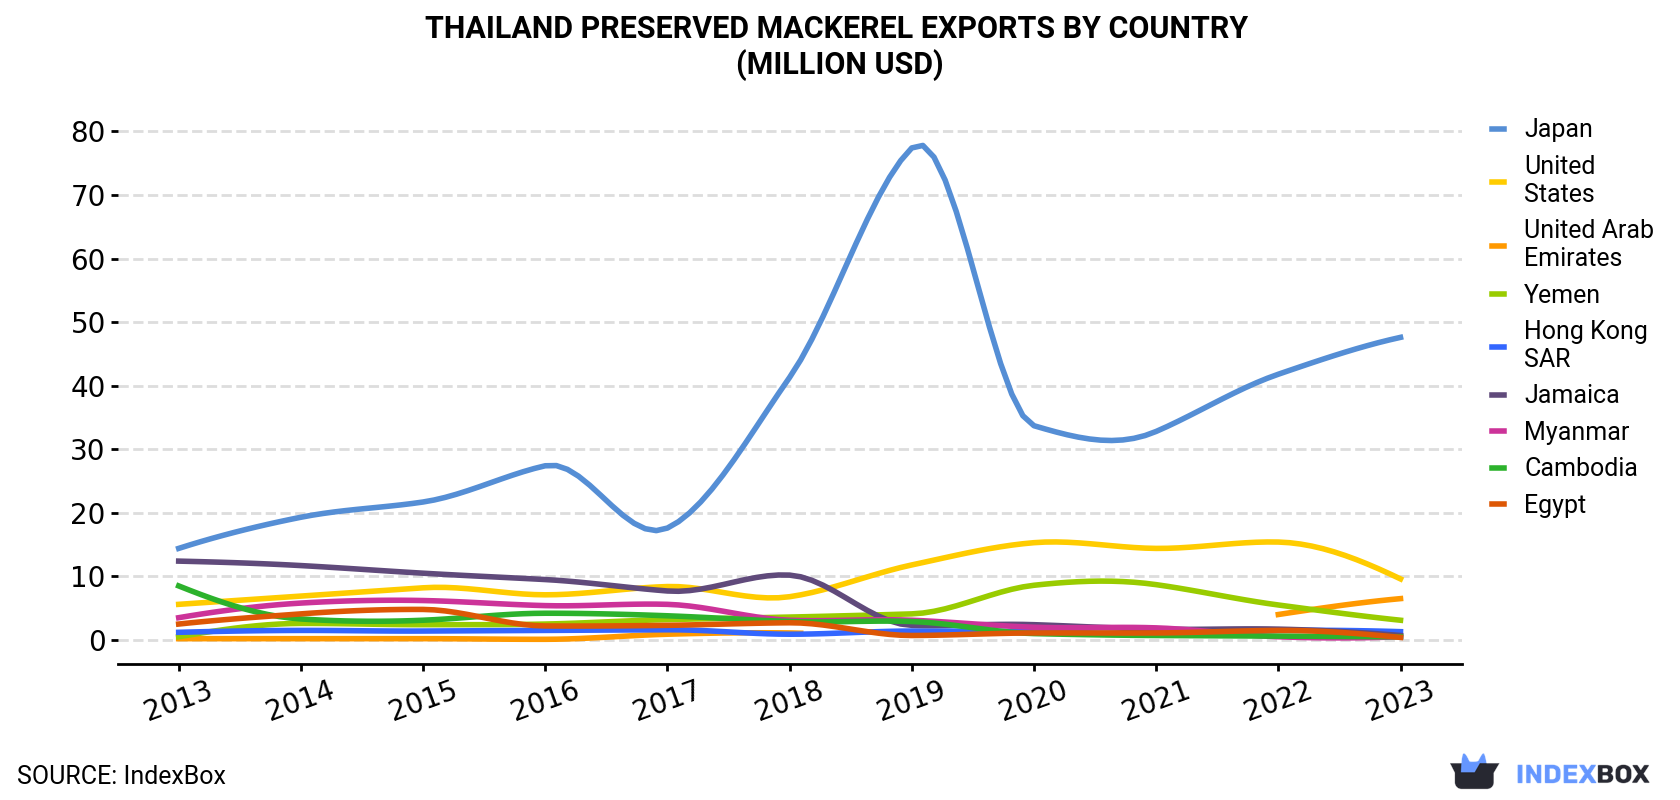 Thailand Preserved Mackerel Exports By Country (Million USD)